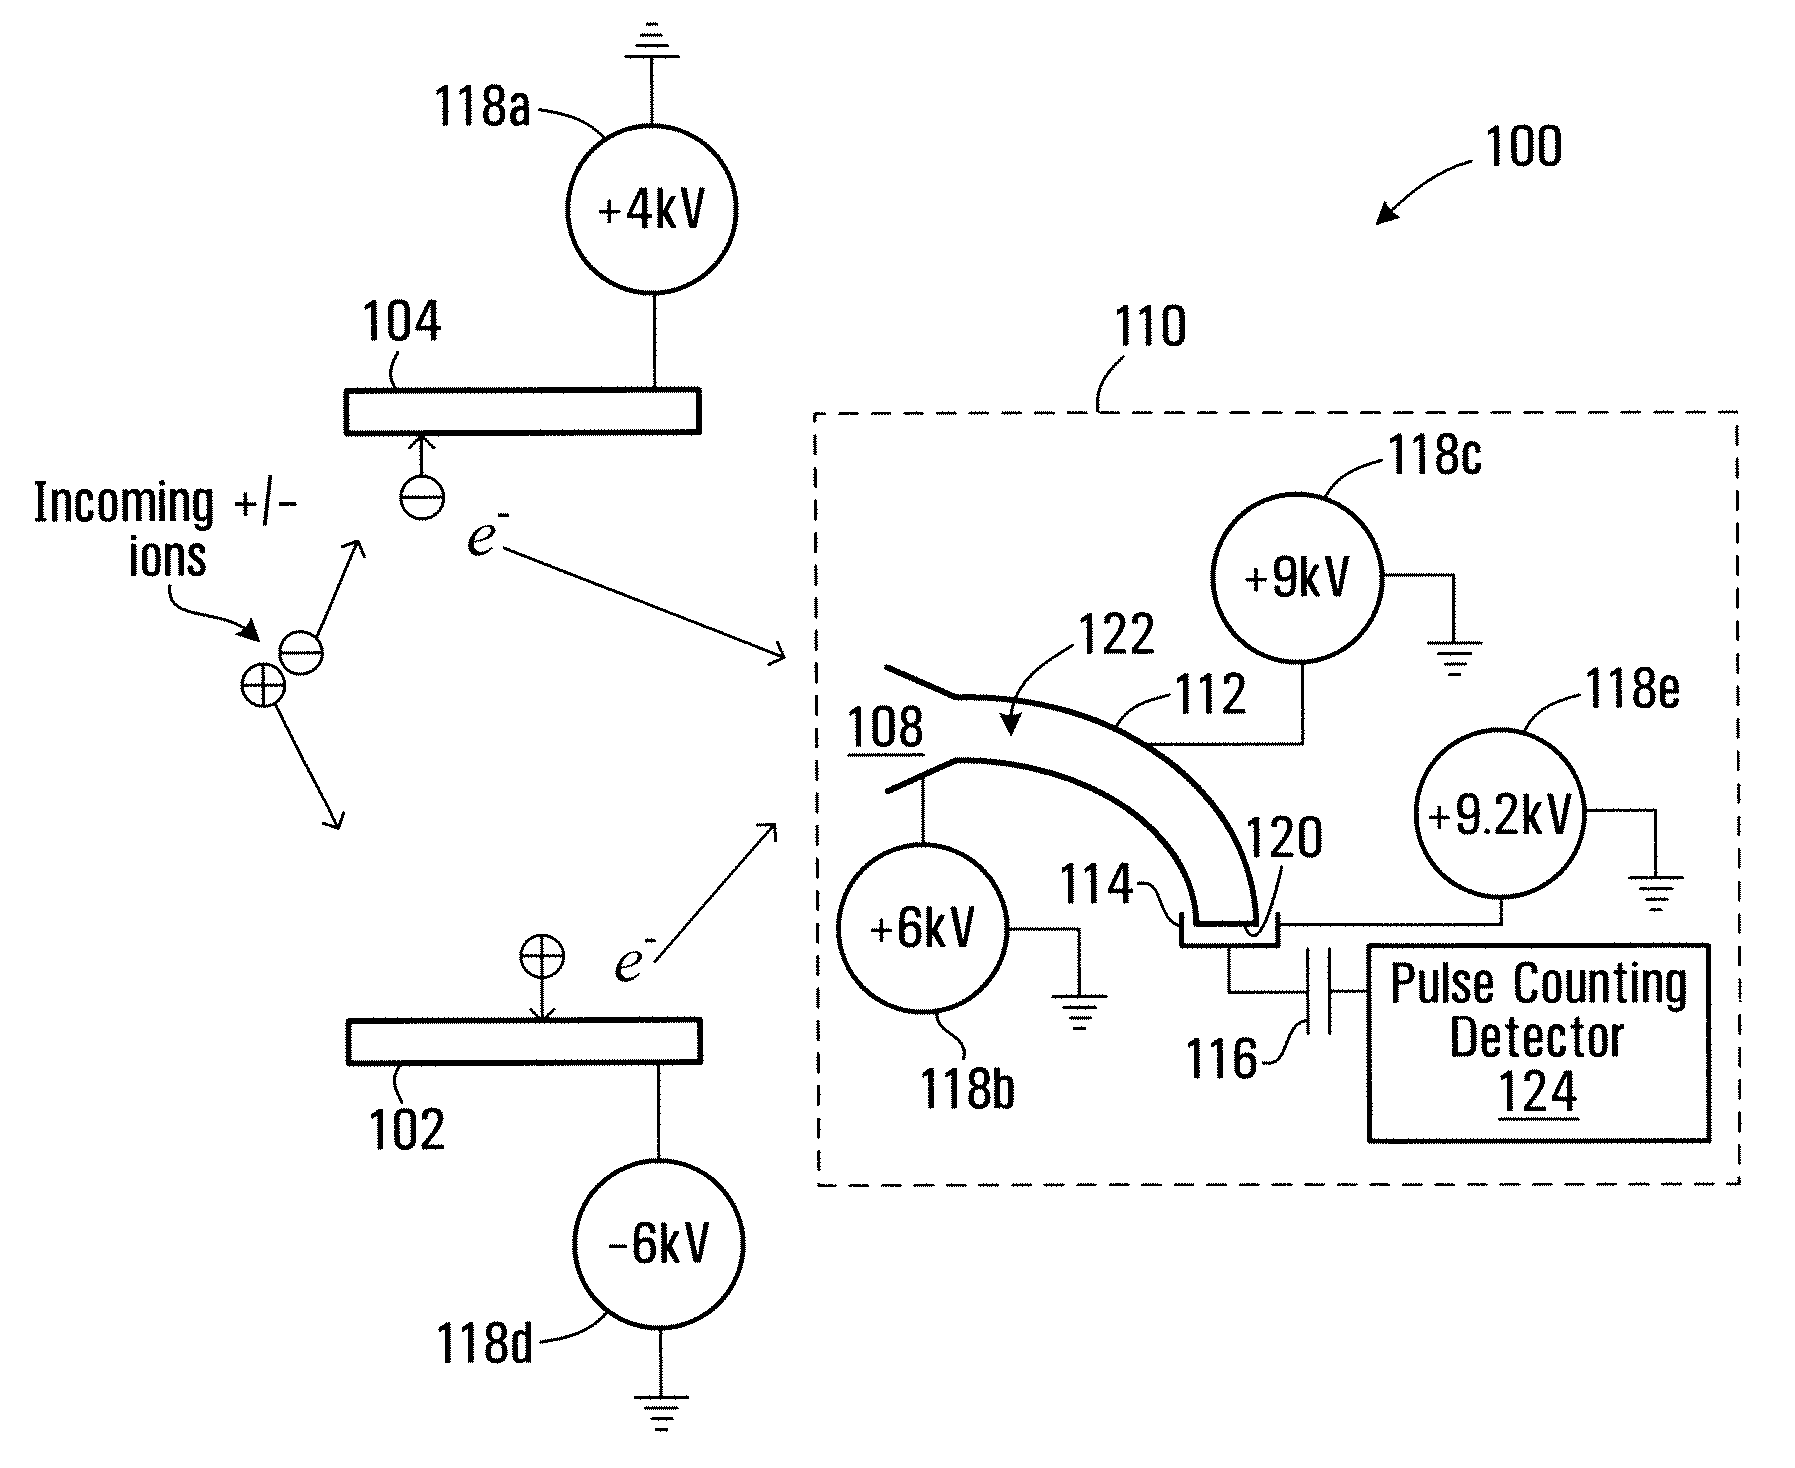 Method and apparatus for detecting positively charged and negatively charged ionized particles